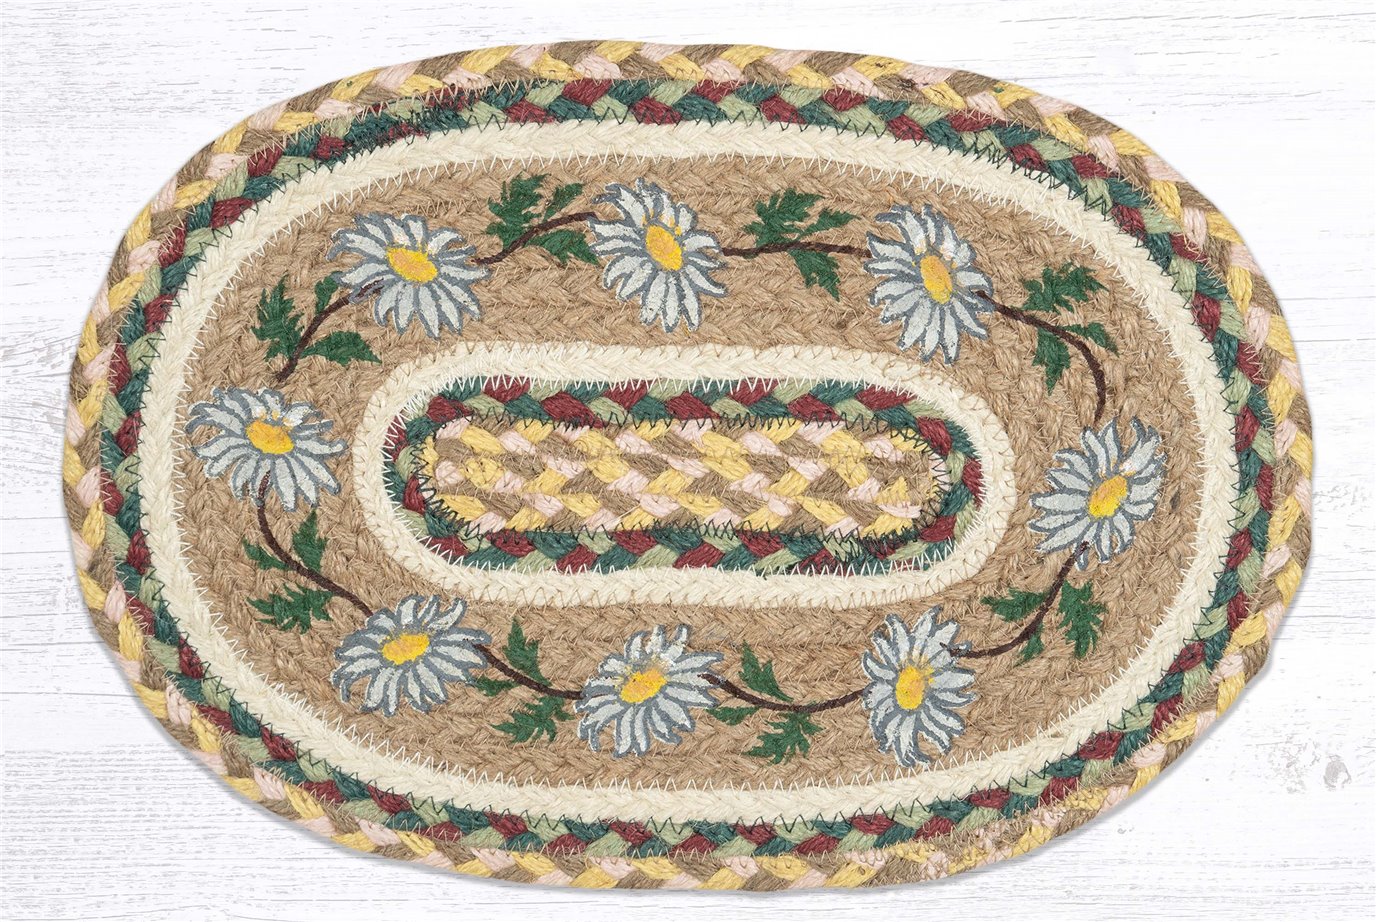 Daisy Printed Oval Swatch 10"x15"